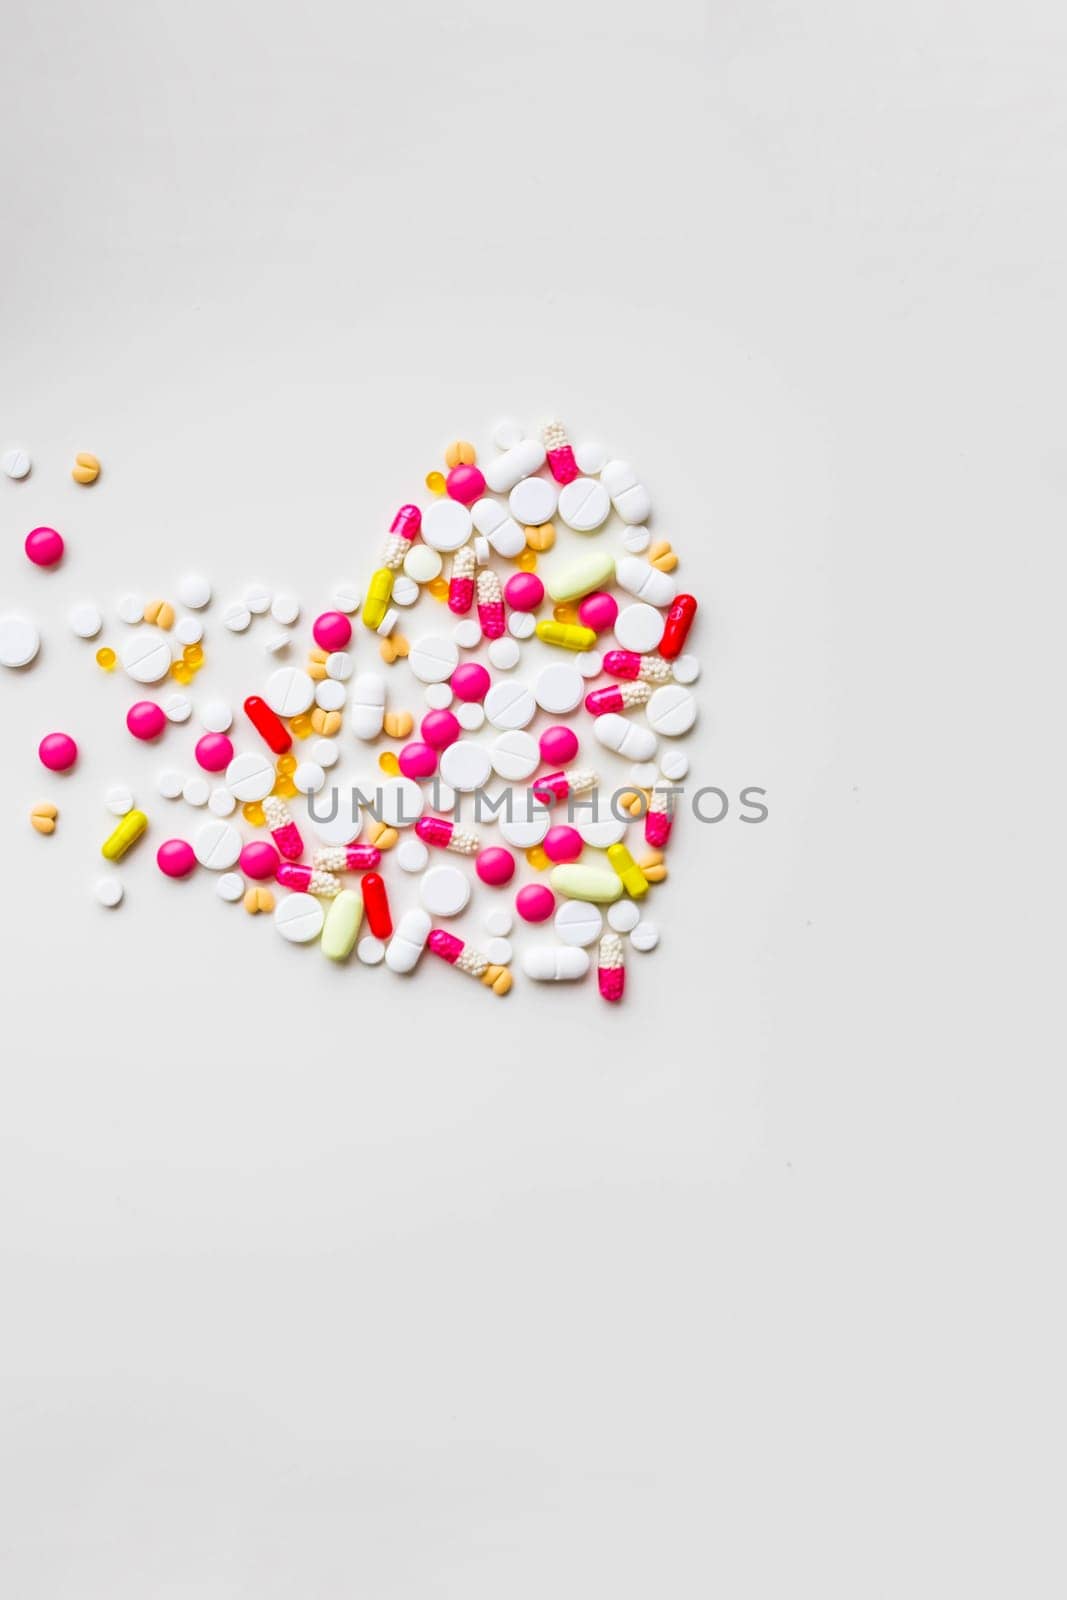 Pile of colorful medicine pills, white, blue, yellow and red, sitting on white background